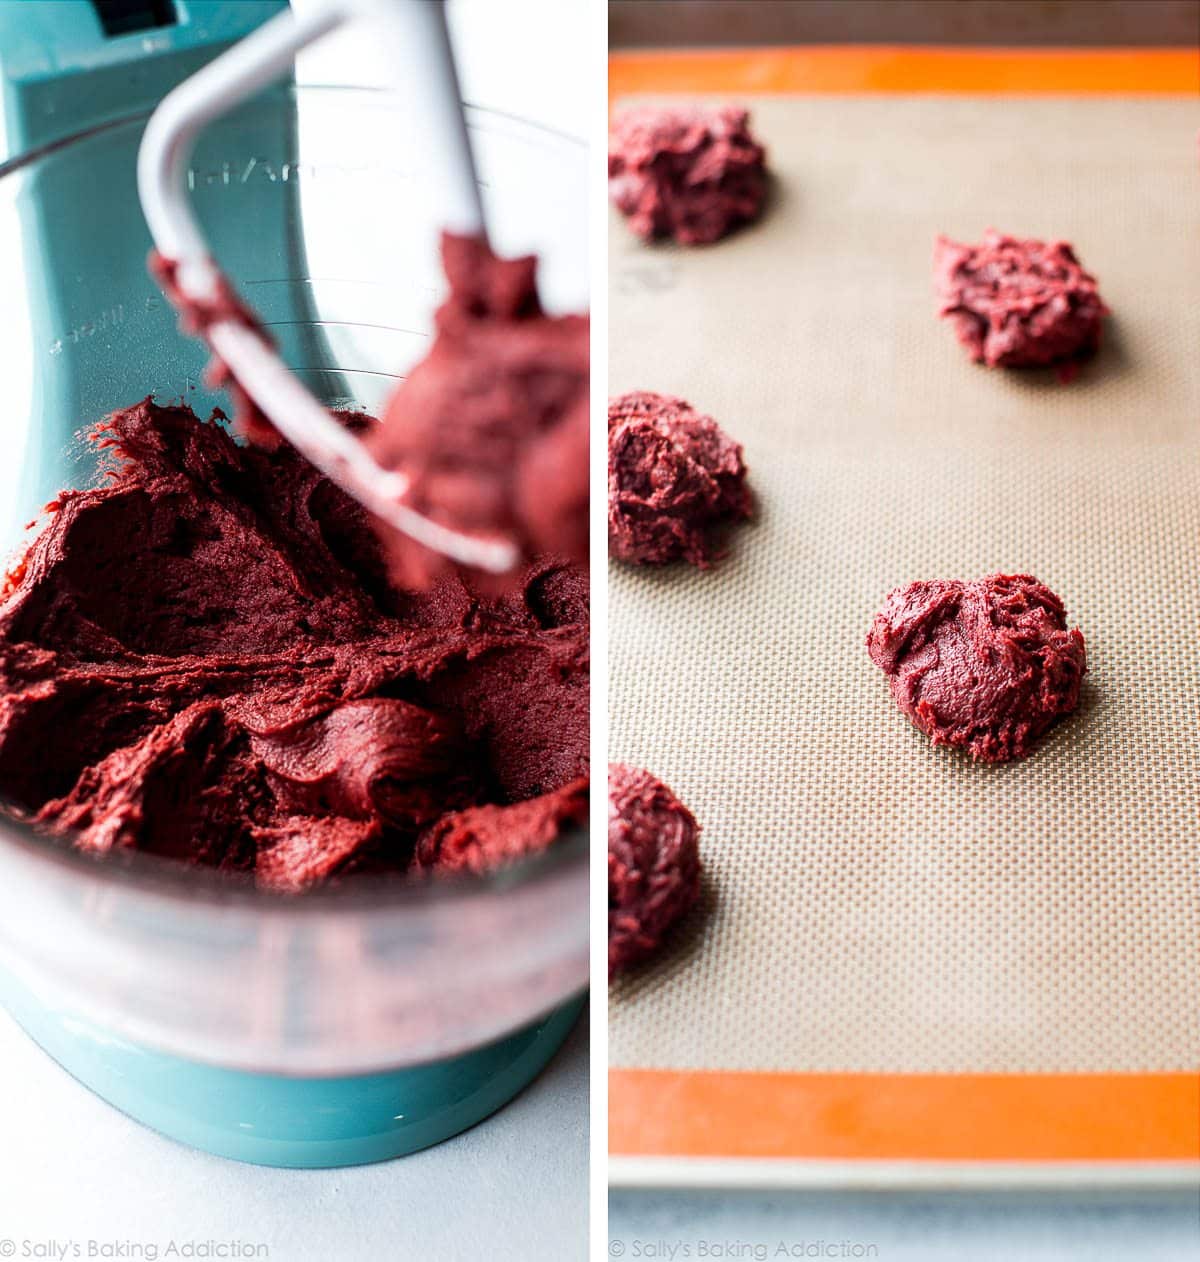 2 images of red velvet whoopie pie batter in a glass stand mixer bowl and mounds of batter for red velvet whoopie pies on a silpat baking mat on a baking sheet